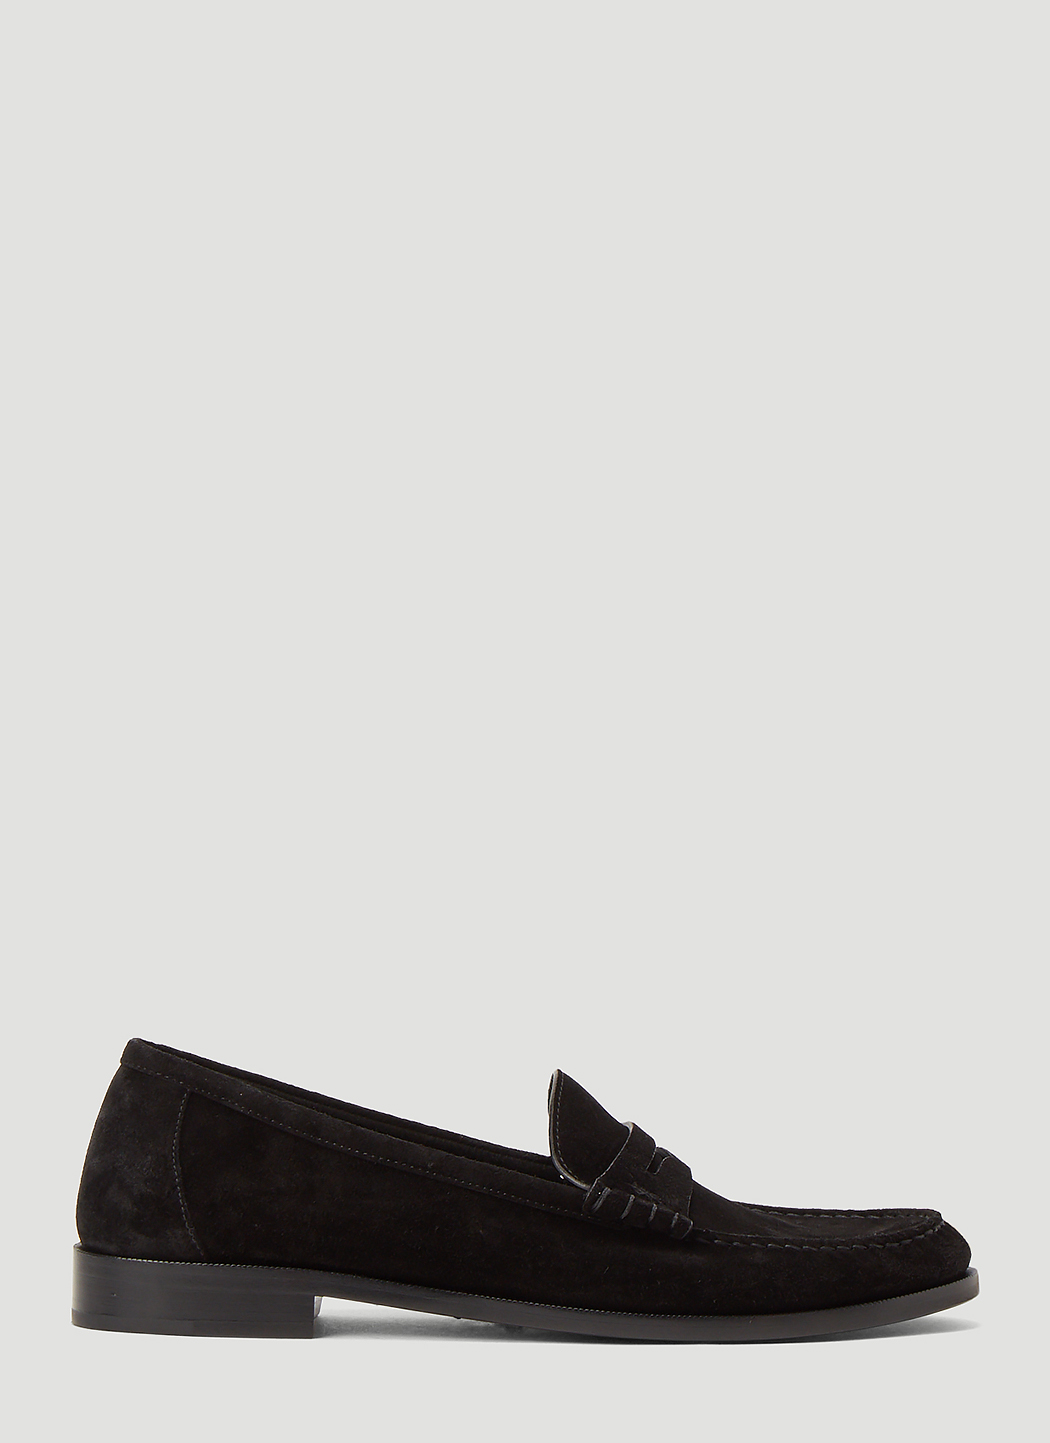 Le Loafer Leather Slip-Ons